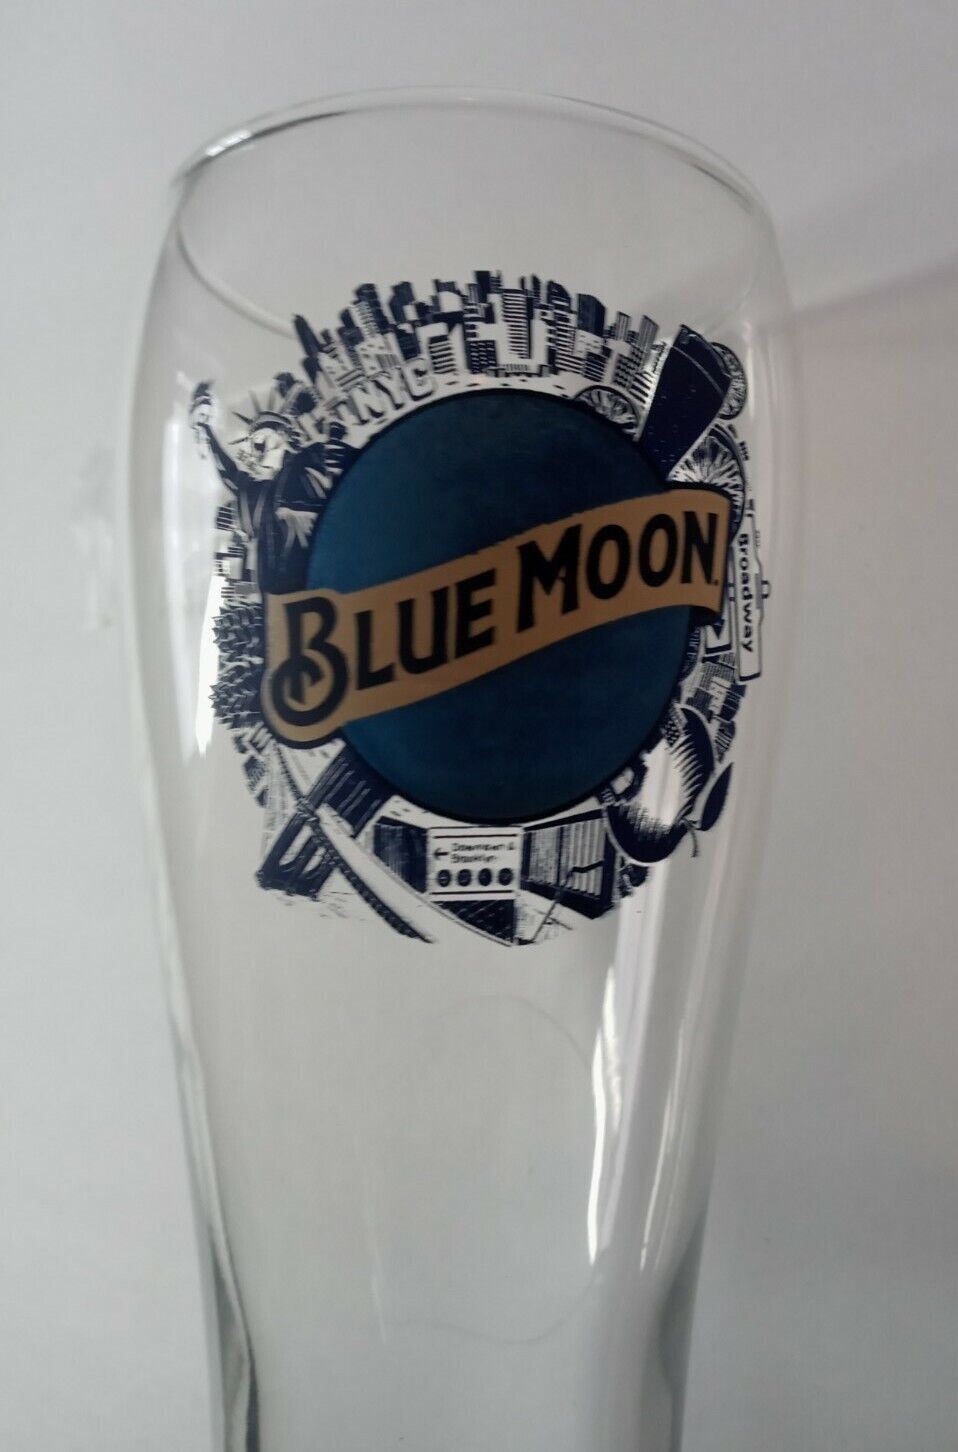 Blue Moon NYC 16 oz Pilsner Beer Glass - Set of Two (2) Glasses NY Edition New Blue Moon - фотография #4